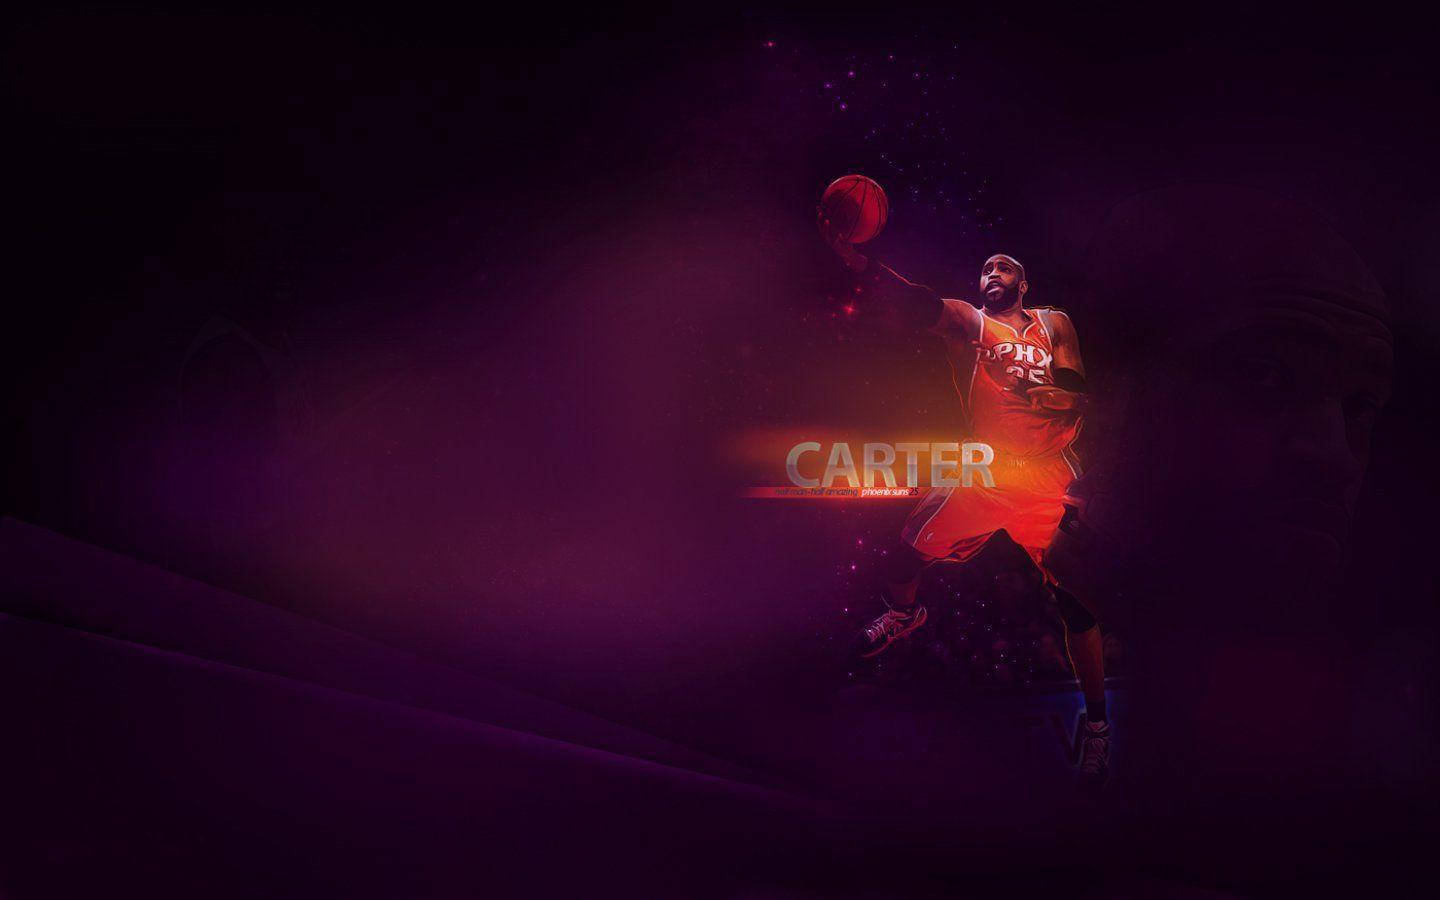 Vince Carter A Cool Player Background